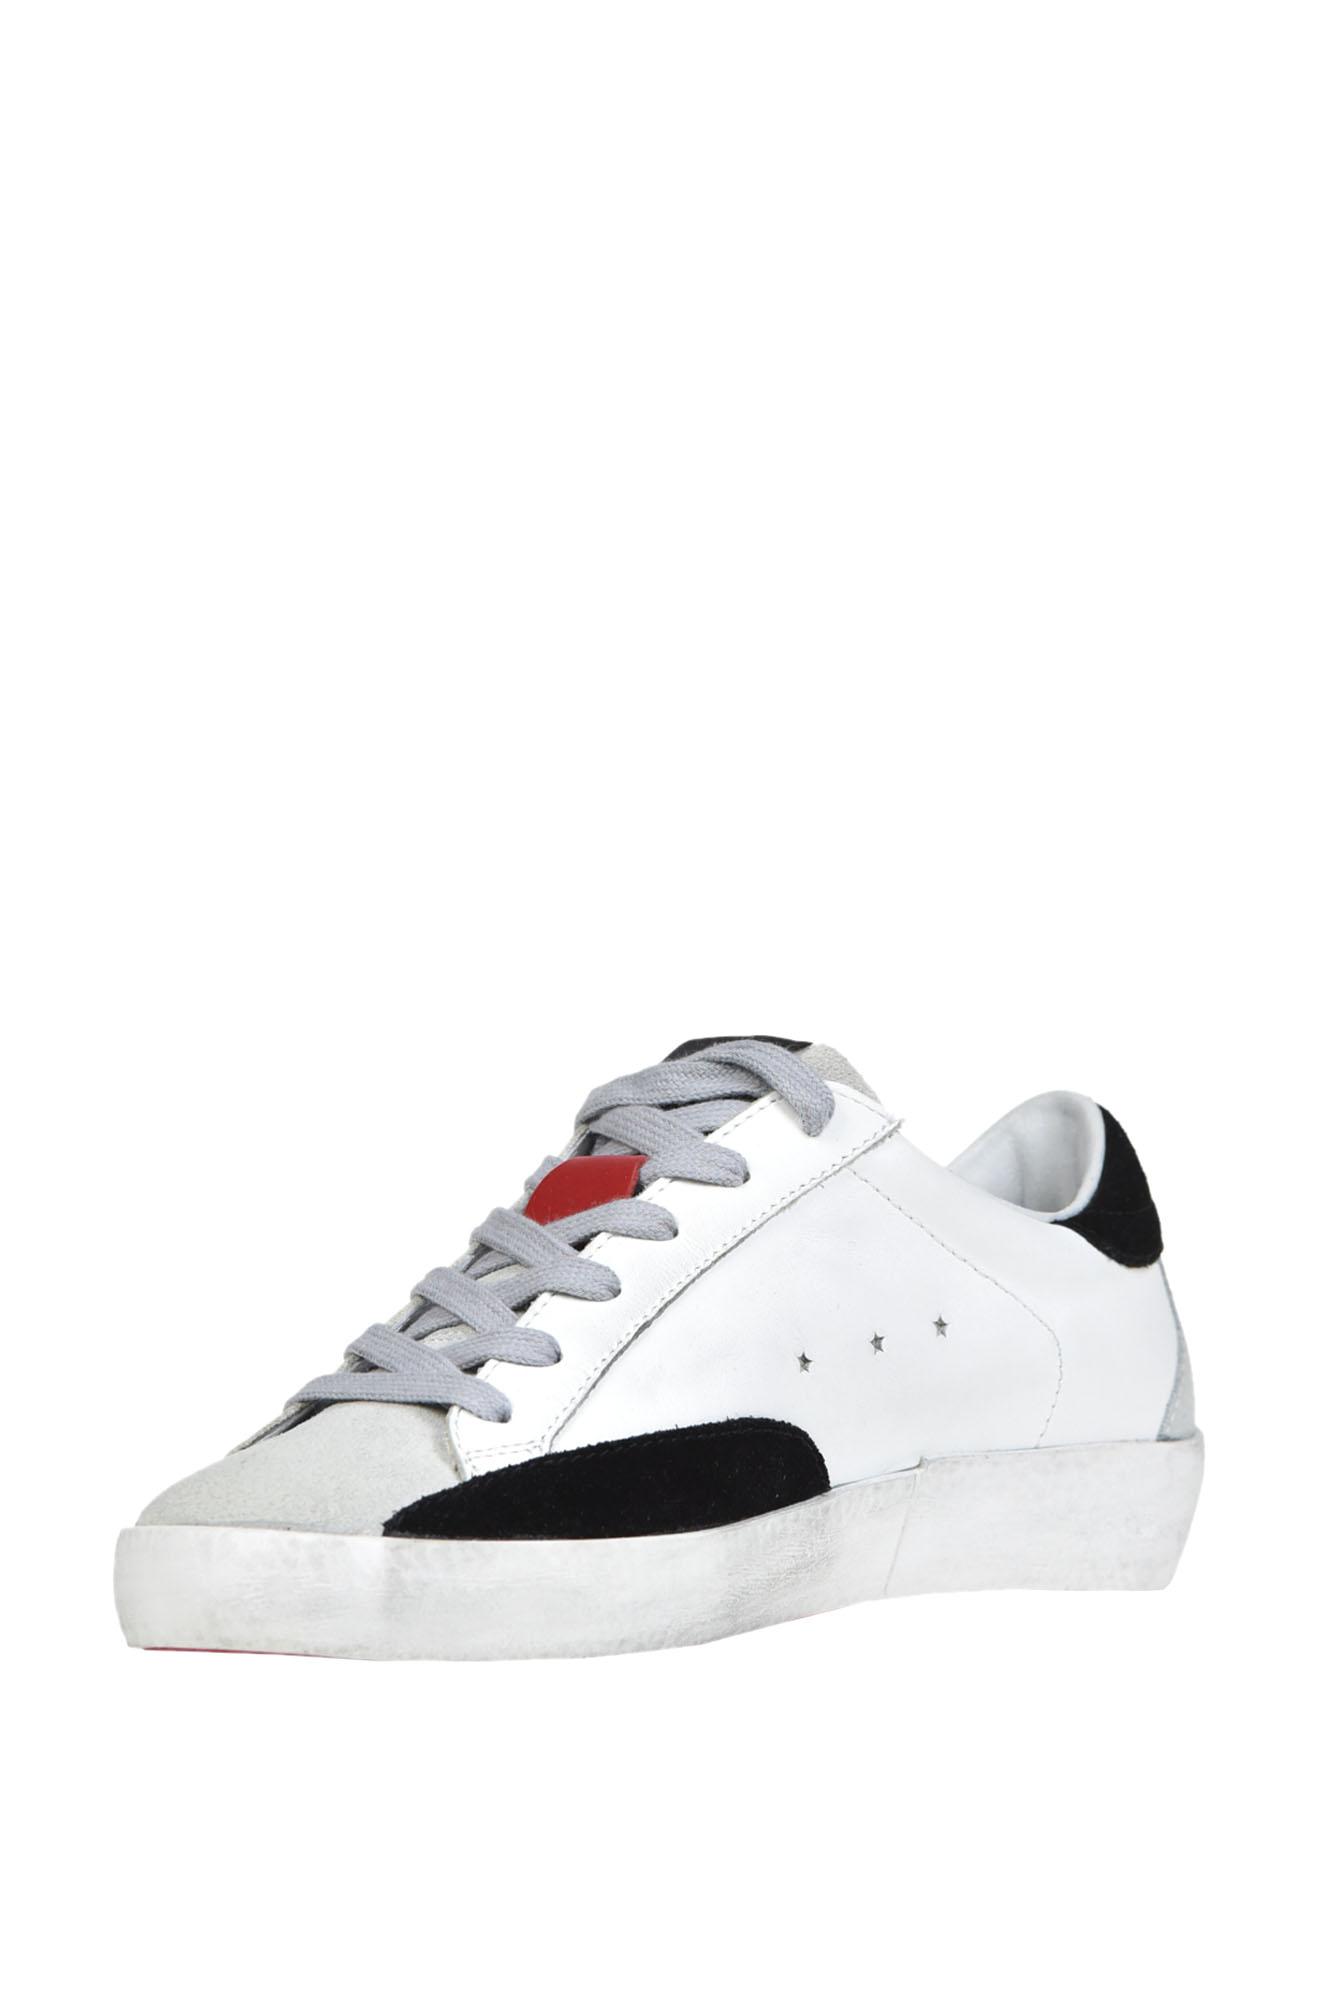 OKINAWA Low Leather Sneakers in White | Lyst